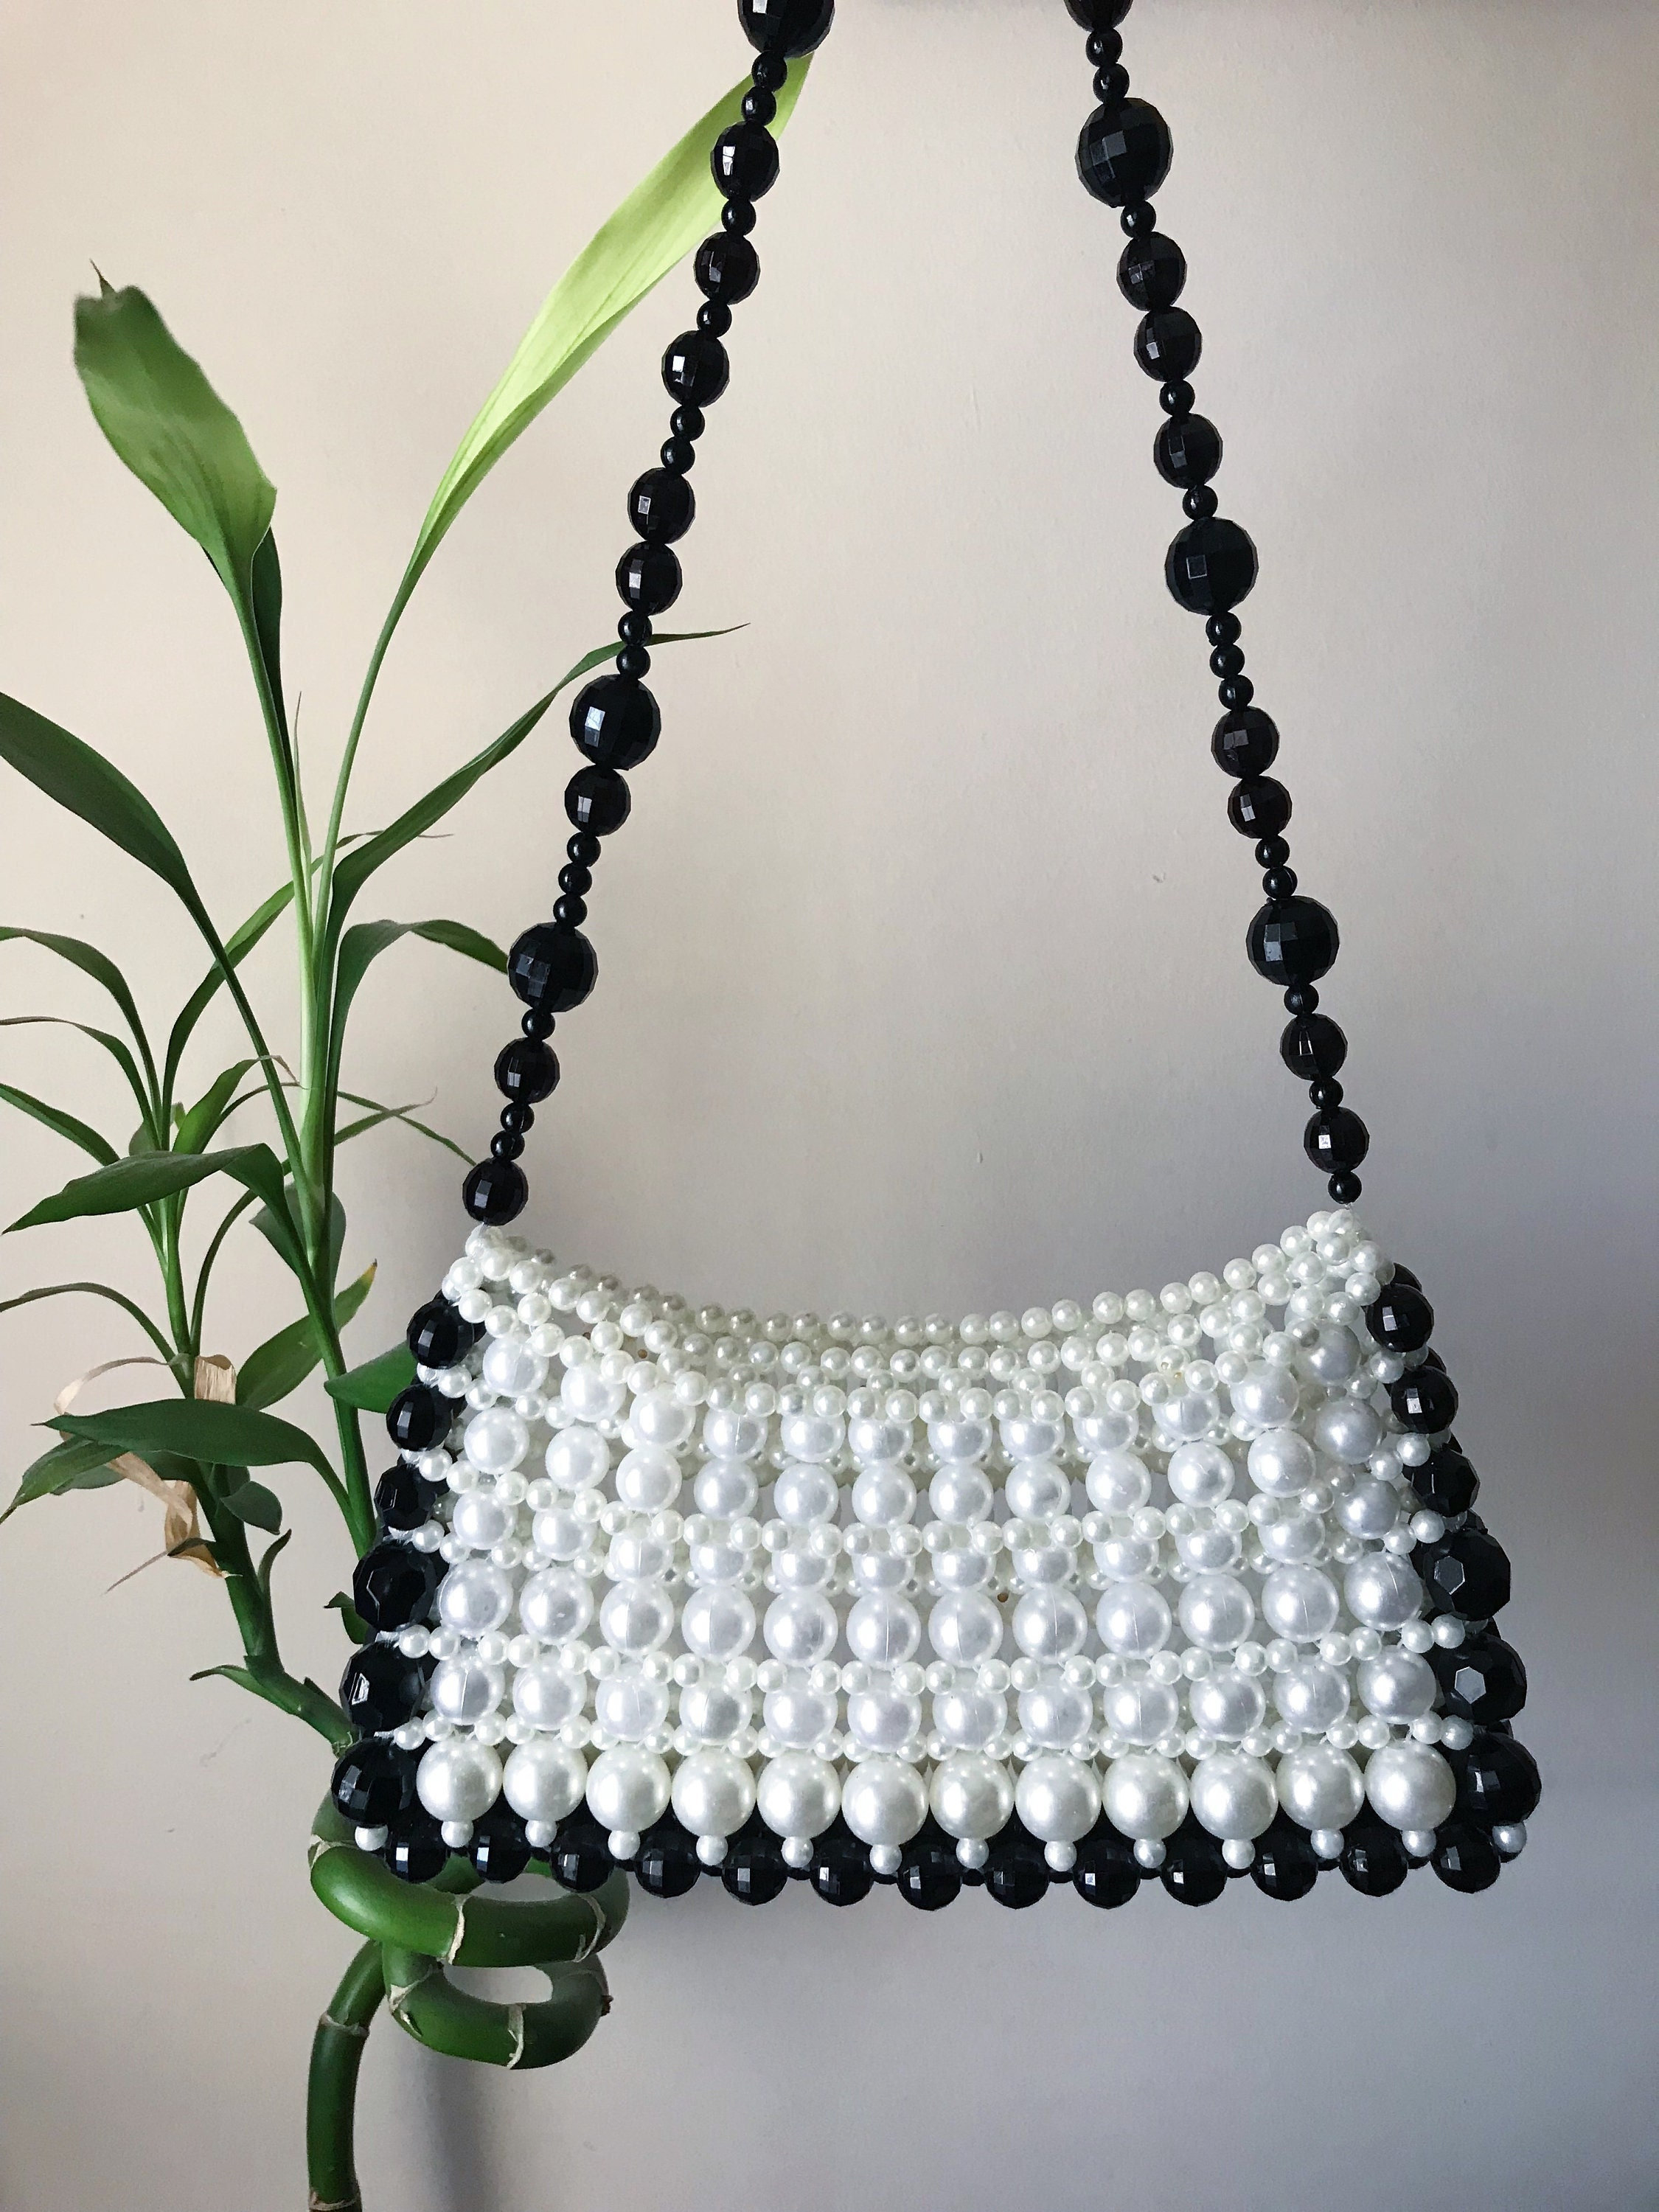 Pearl Bag | Purse in White | Small Imitation Faux Pearl Beaded Handbag | Bead Baroque Pearls | Evening Cocktail Party Bag | Womens Minimal